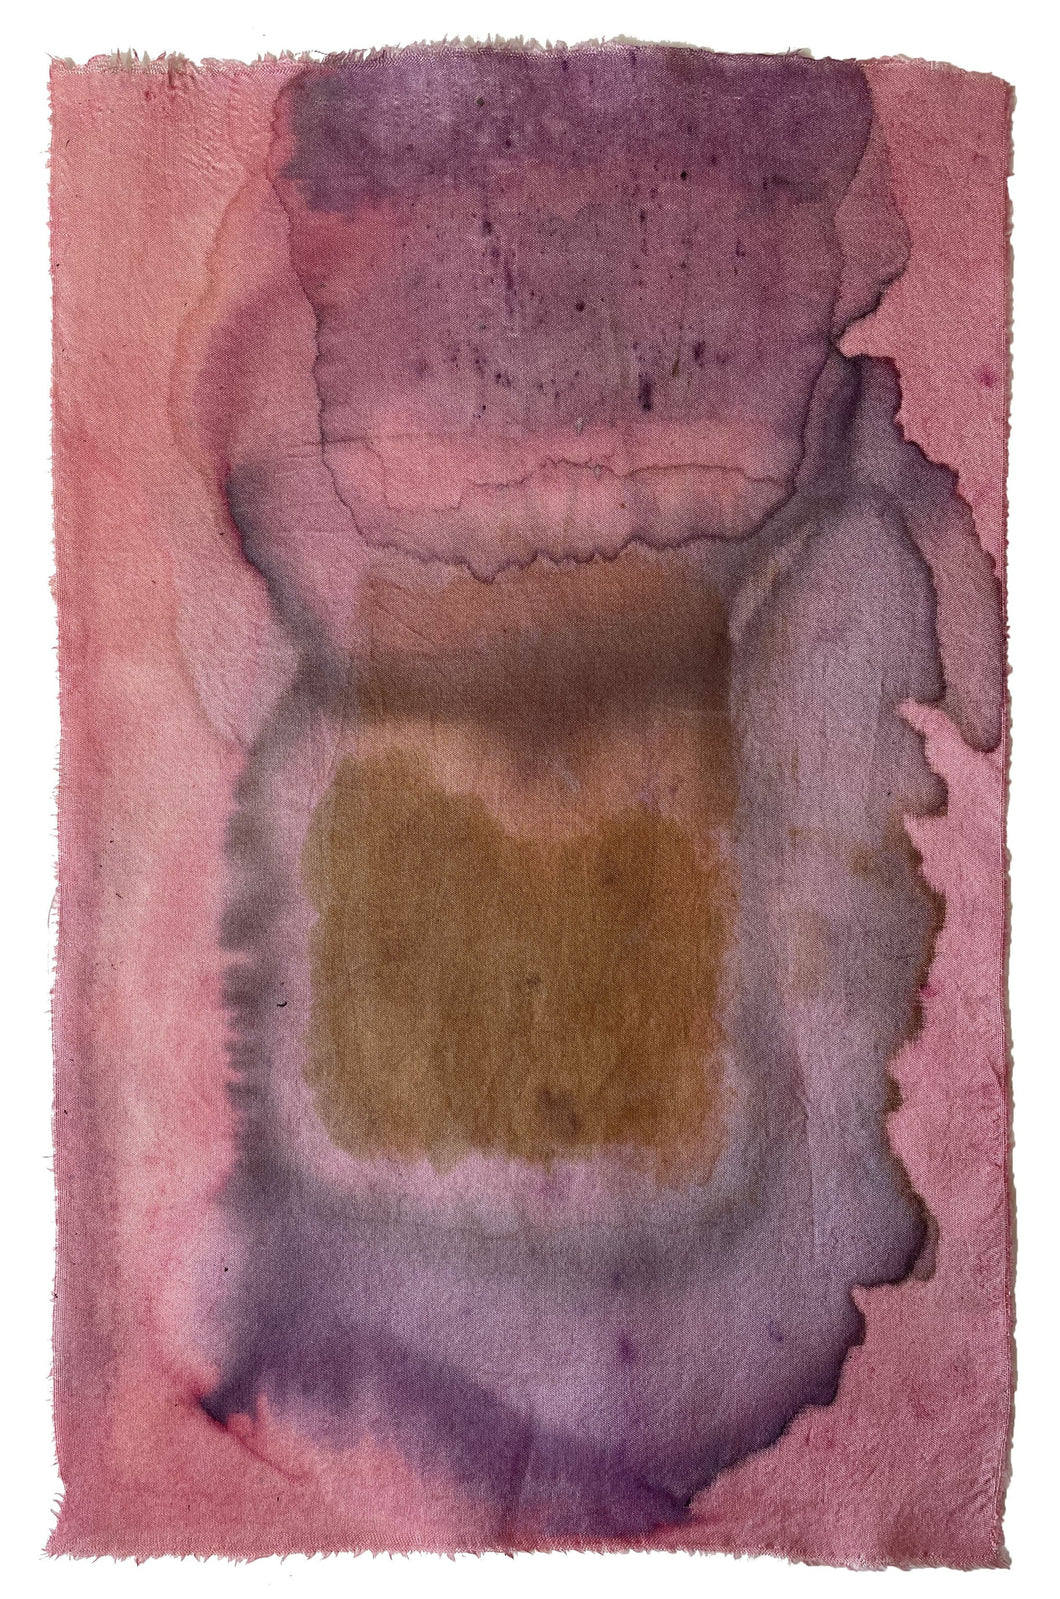 self portrait - naturally dyed textile